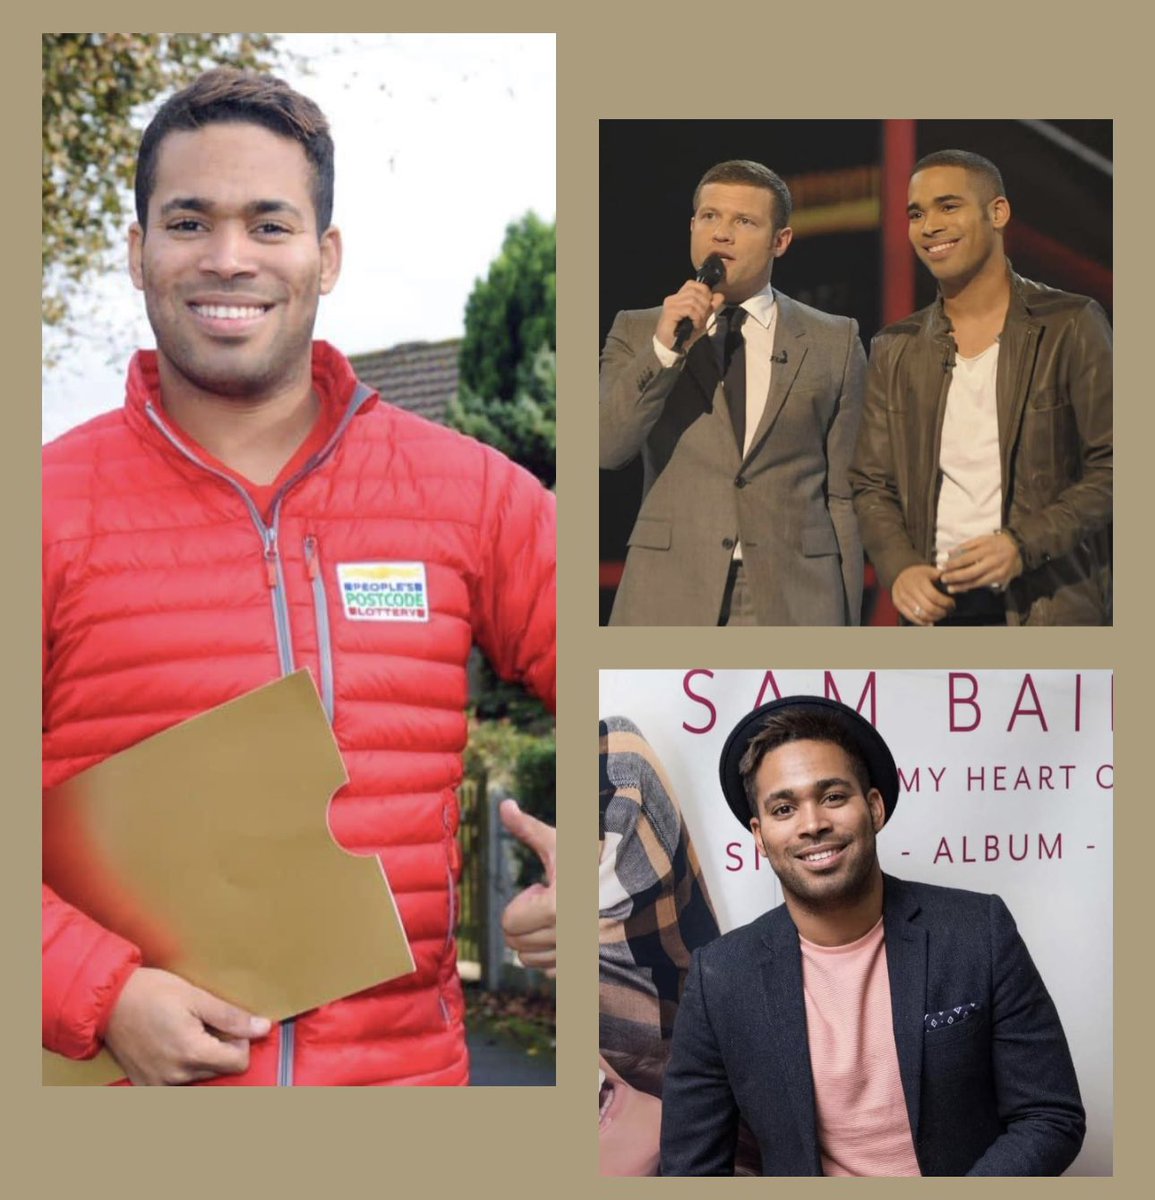 🚨 EPISODE INCOMING!! 🚨 This weekend Harry caught up with #DanylJohnson earlier today to see what he’s been up to since the #Xfactor experience… Thank you for talking on the pod 💯 @talk2mehull @DanylAJohnson #podcast #Hull #Hullpodcast